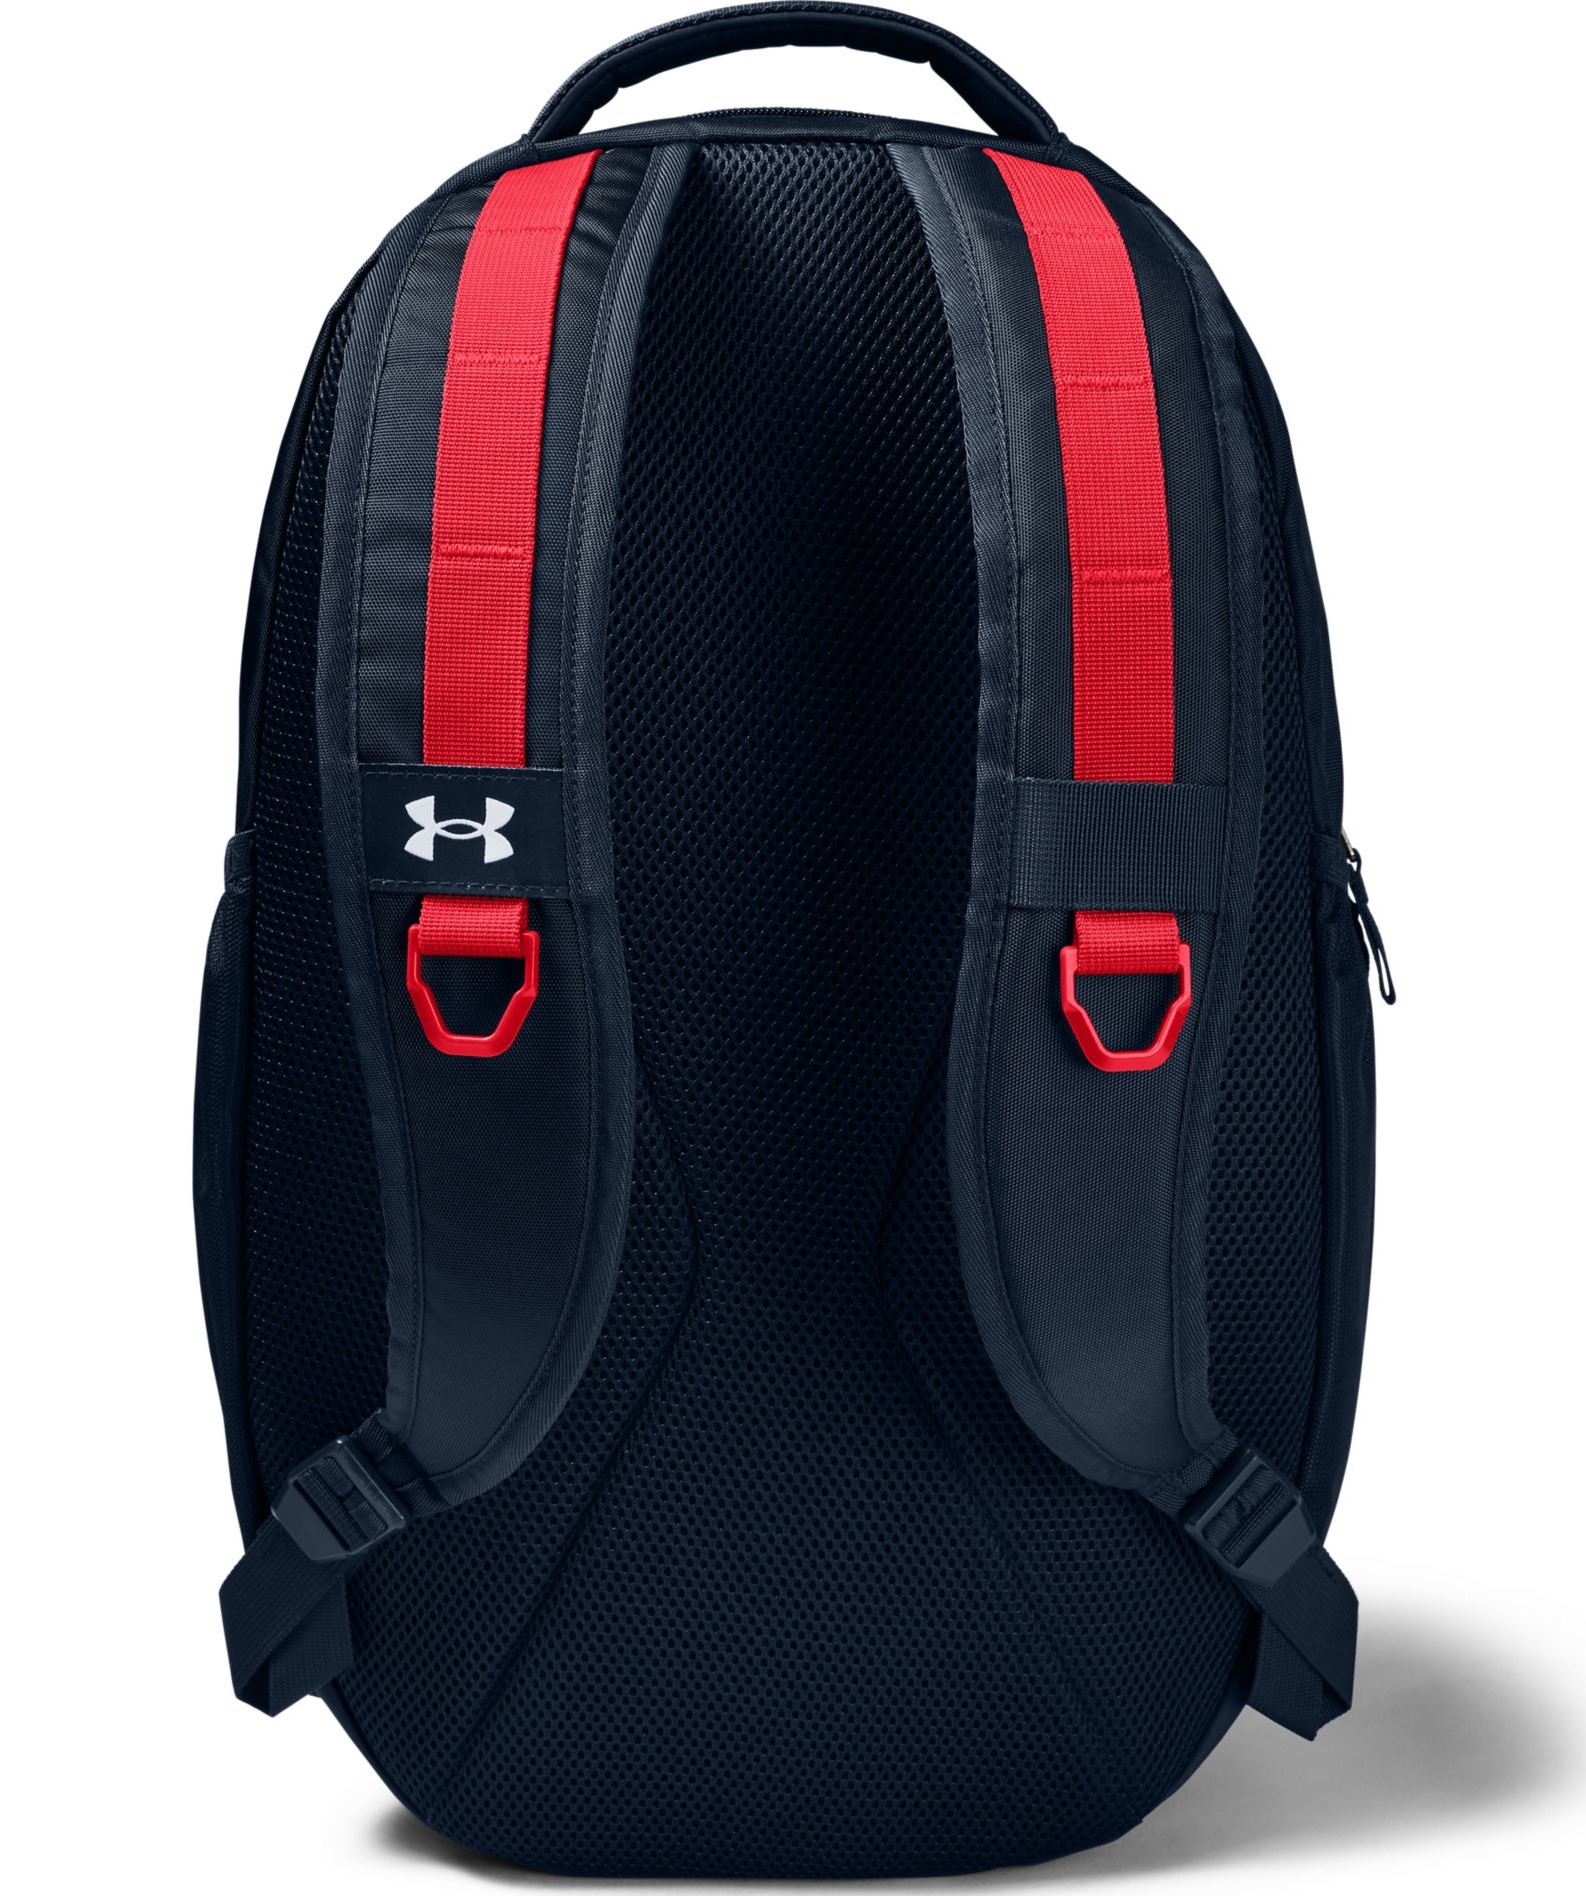 Under Armour 1361176-409 Hustle Backpack, Academy Blue One Size - image 2 of 3